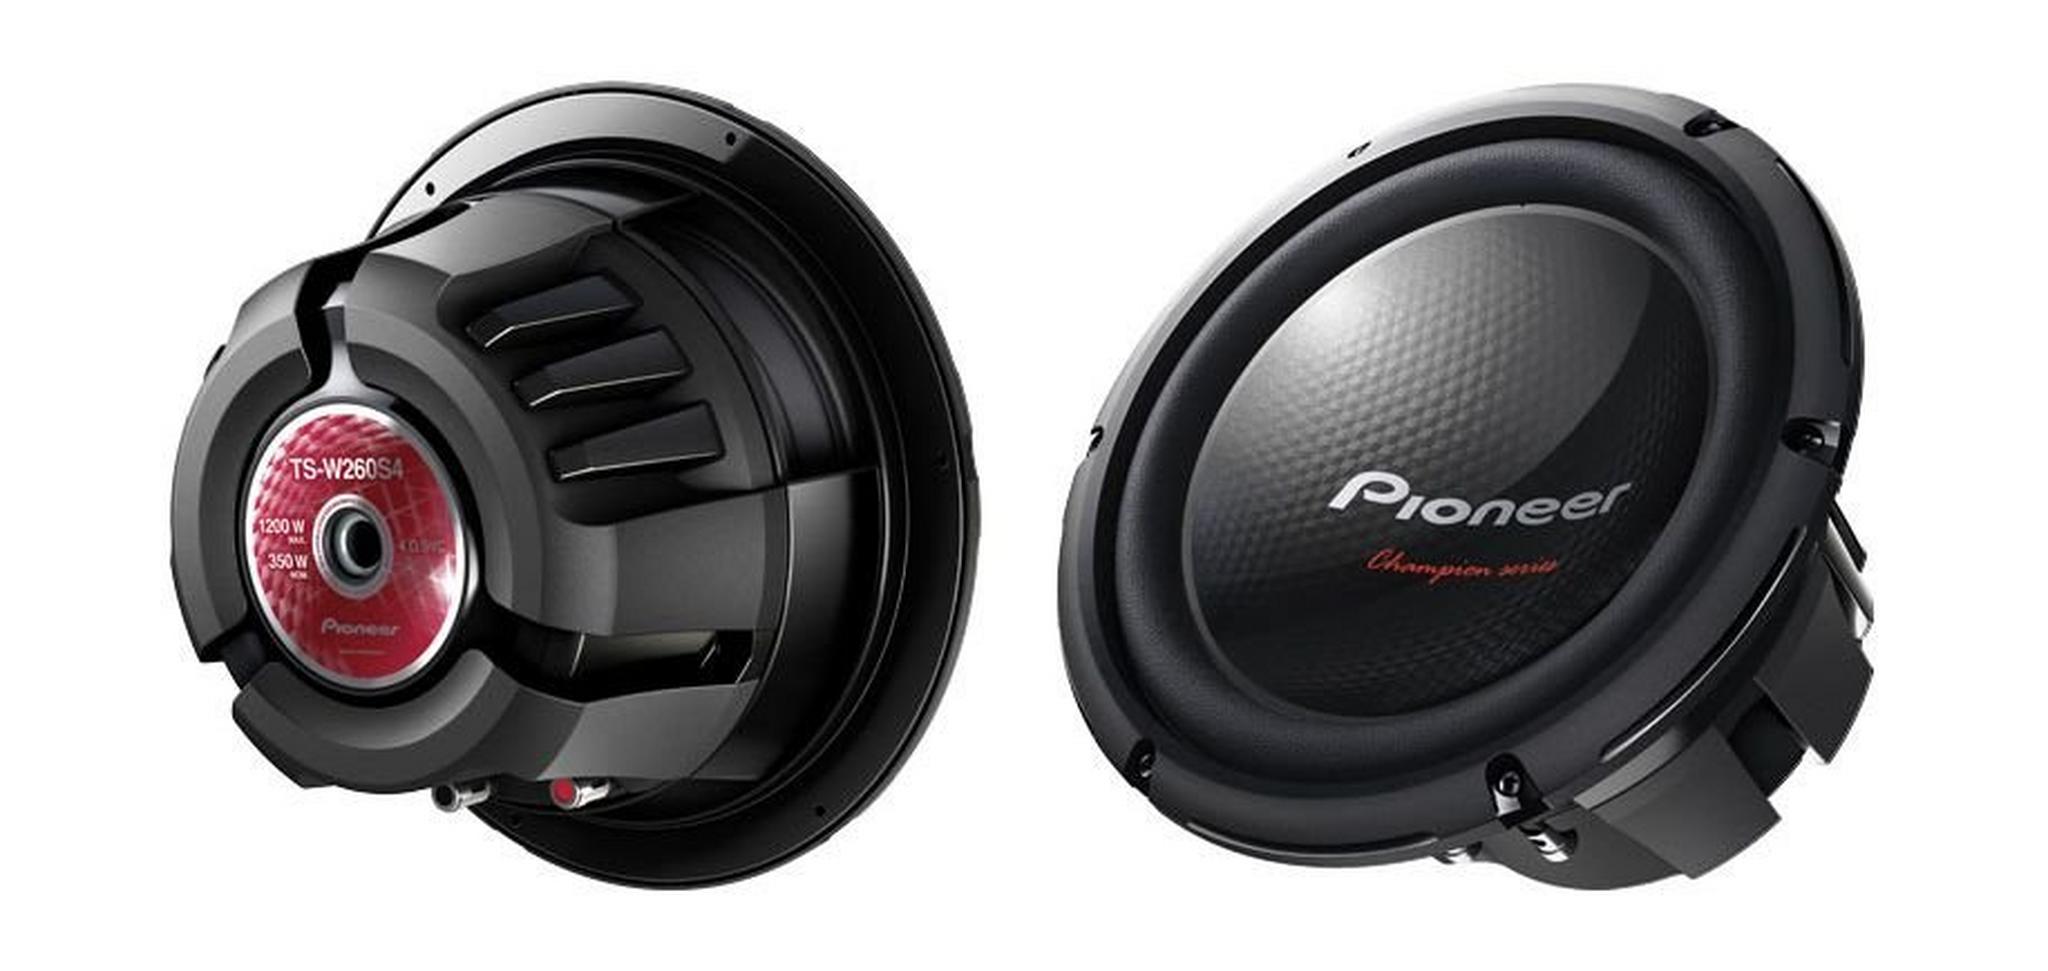 Pioneer 1200W 10-inch Champion Series Car Subwoofer (TS – W260S4)